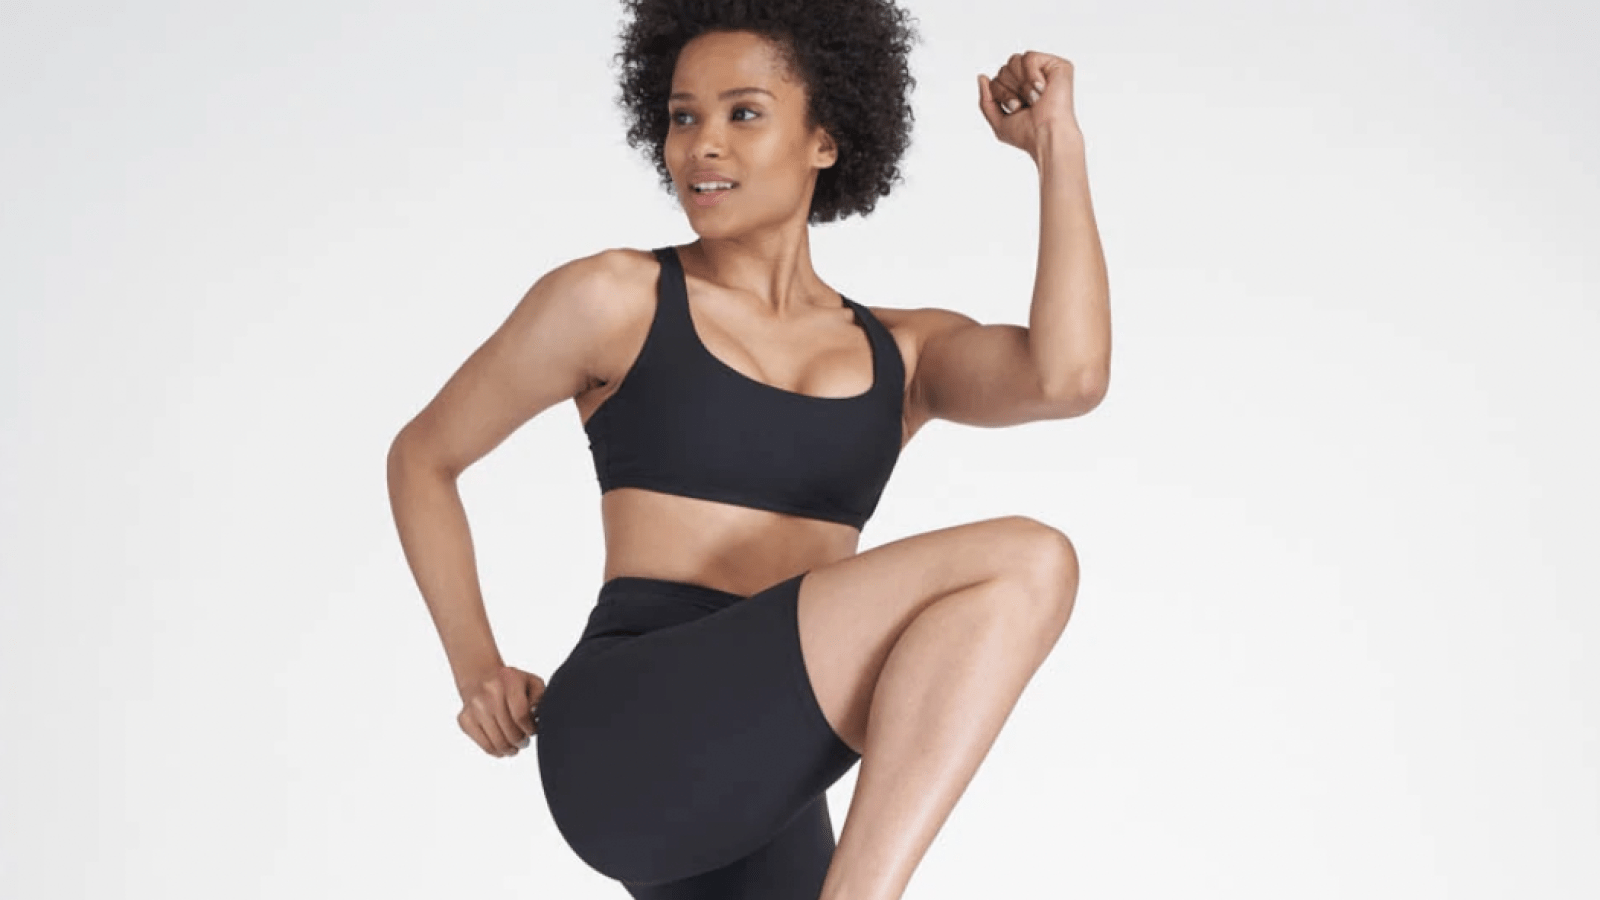 Shop The Spanx Sale to Save Big on This Smoothing Shapewear